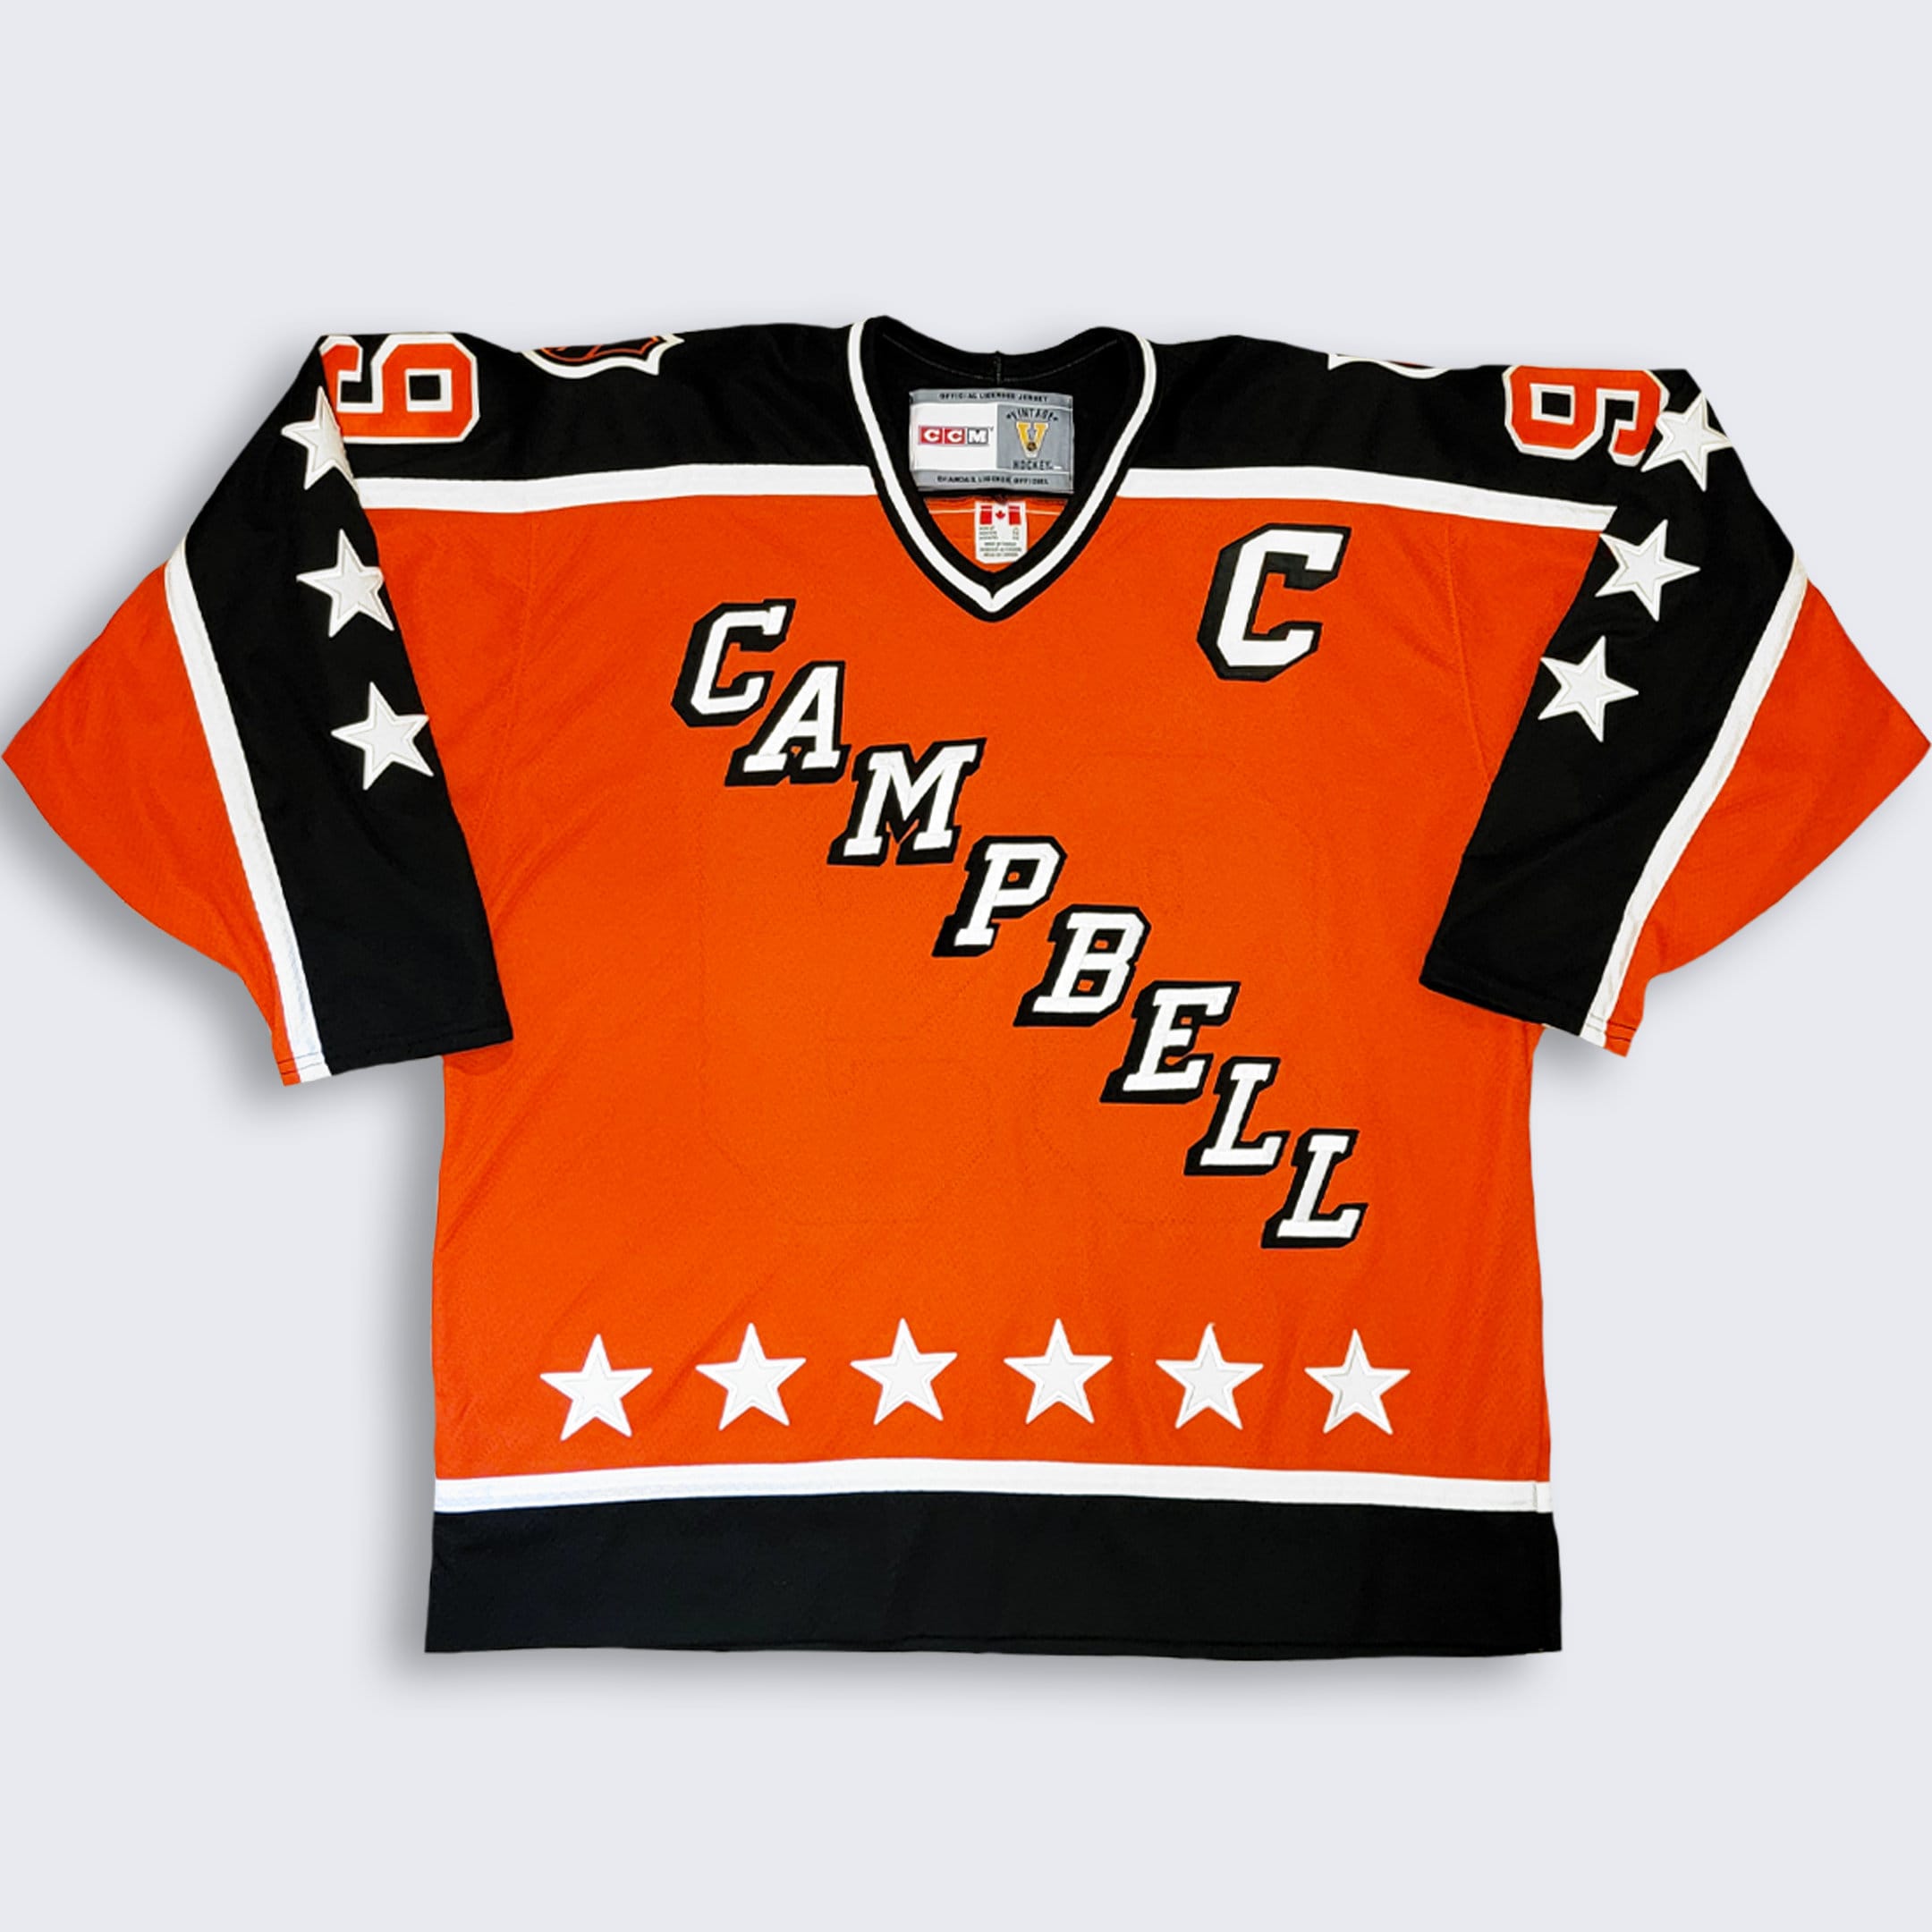 Wayne Gretzky Signed Campbell Conference NHL All-Star Game Jersey